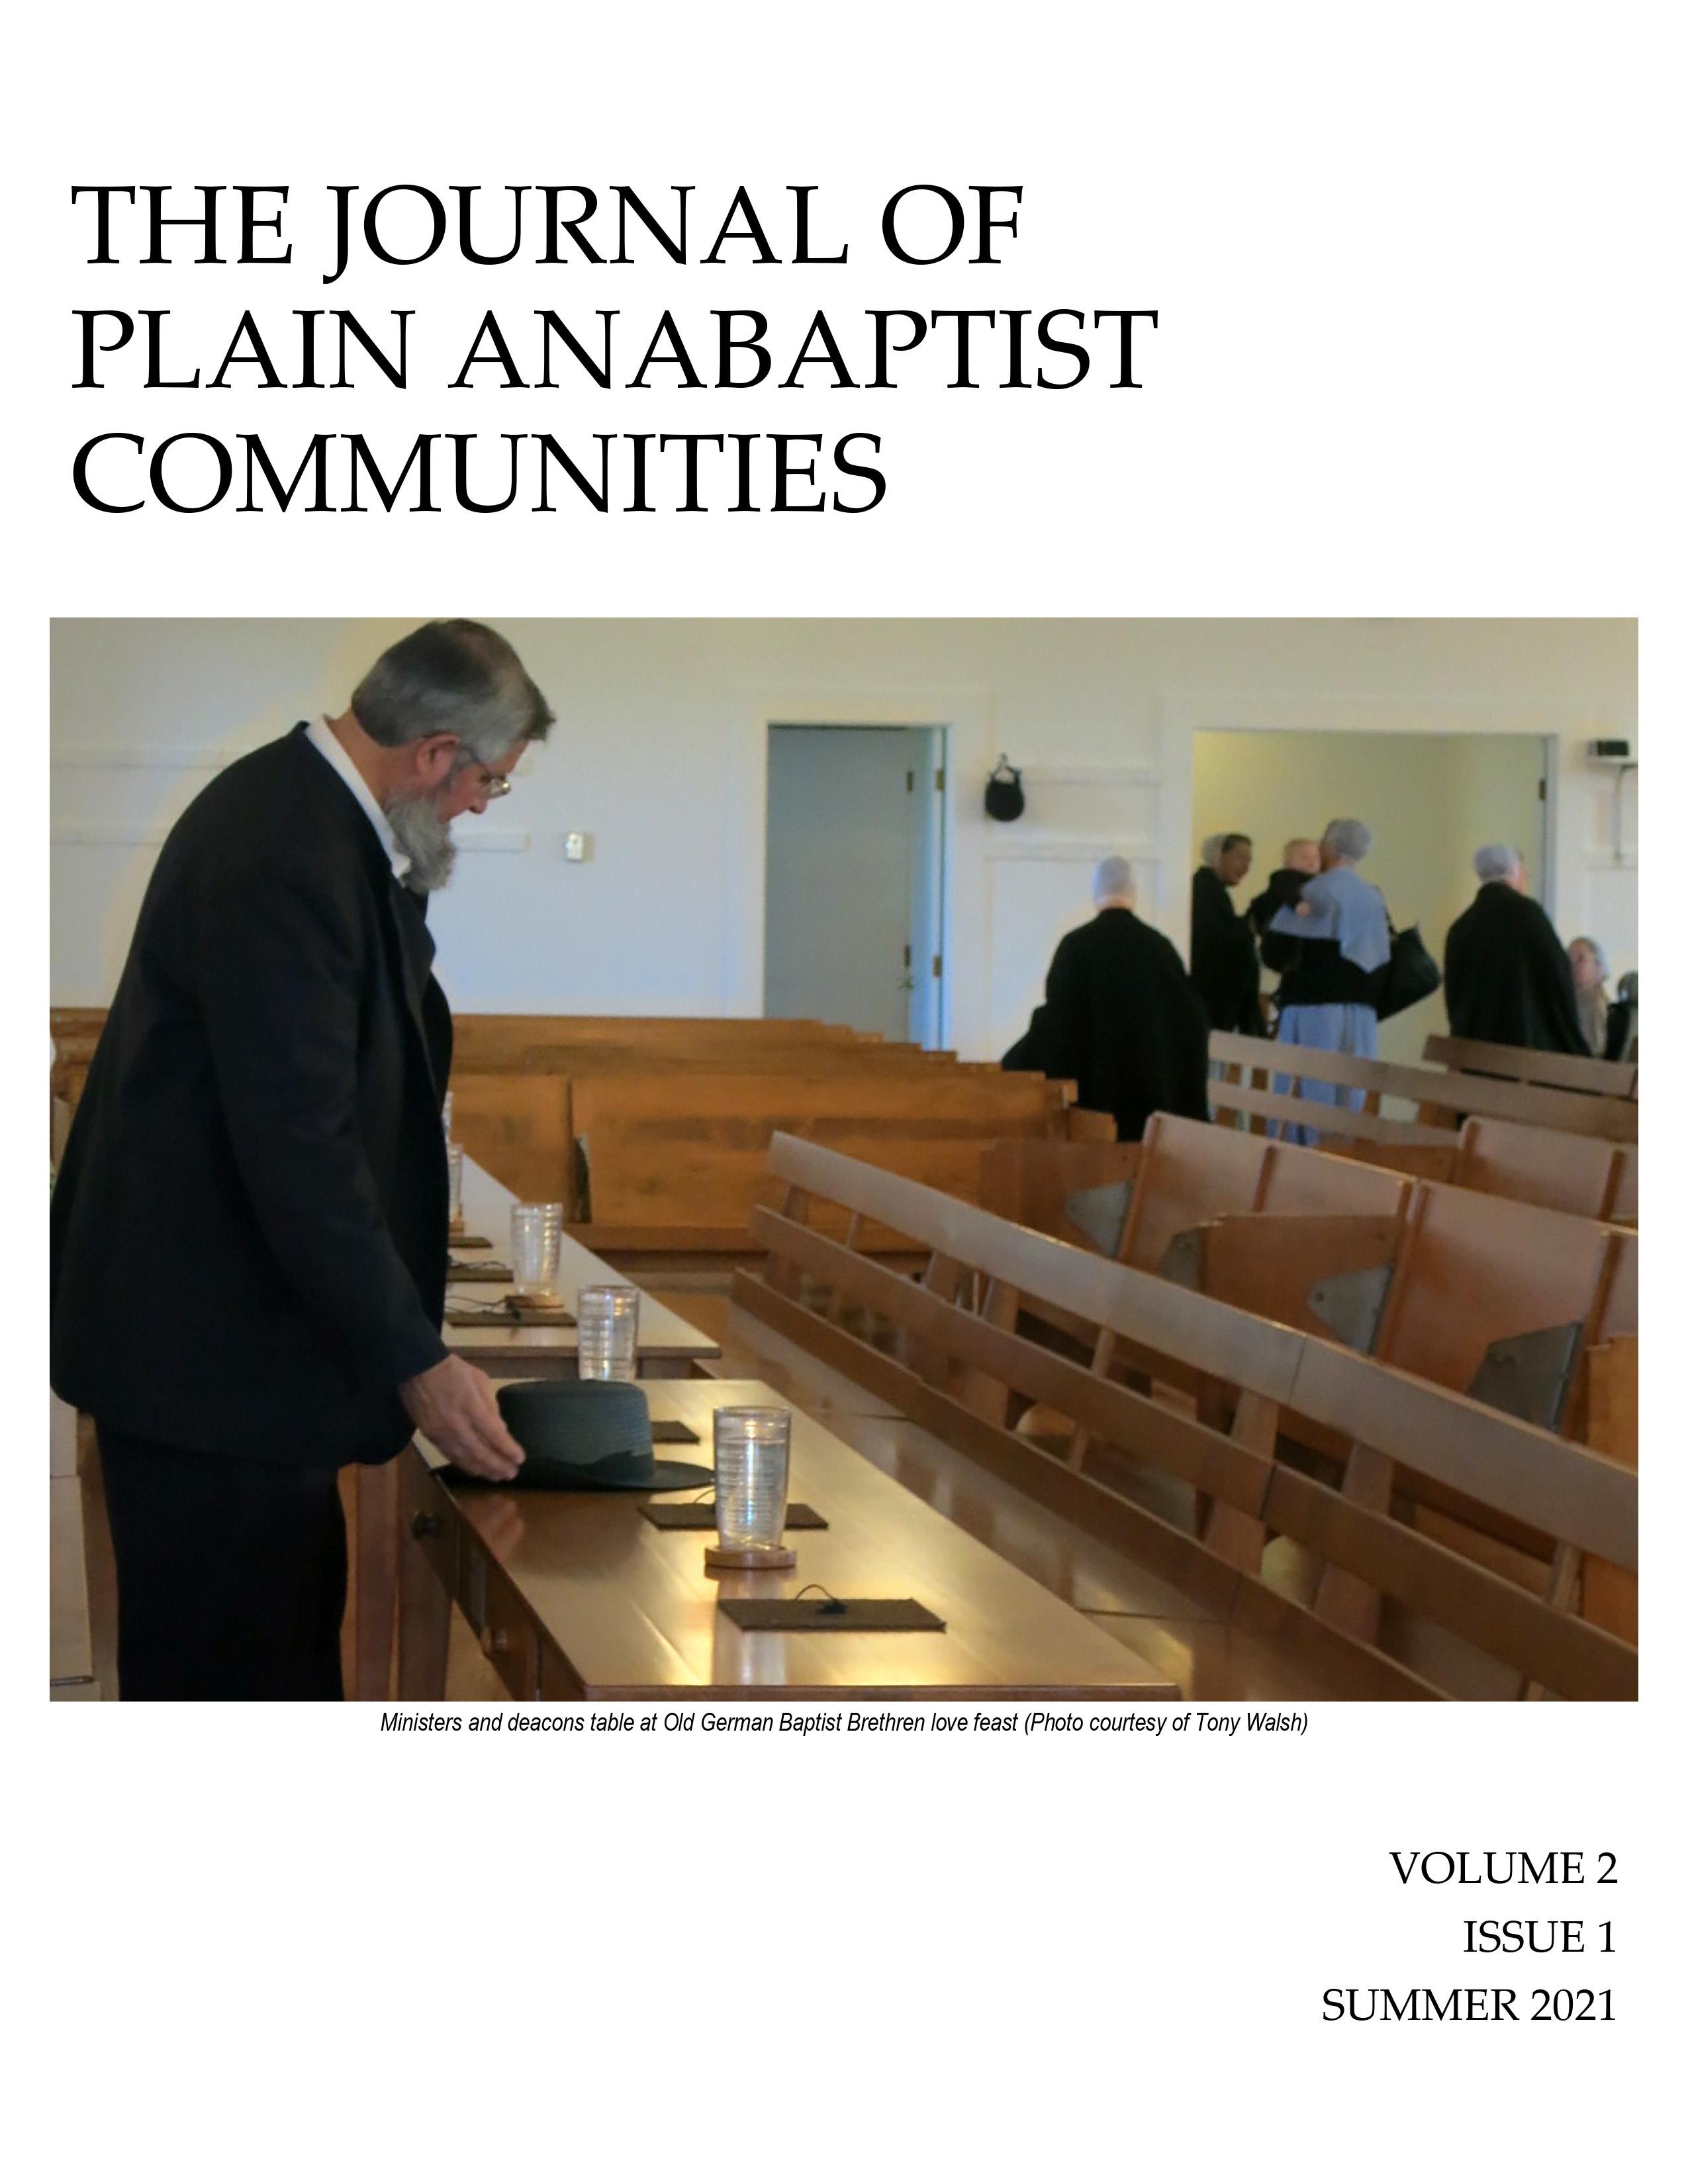 The Journal of Plain Anabaptist Communities Volume 2, Issue 1, Summer 2021